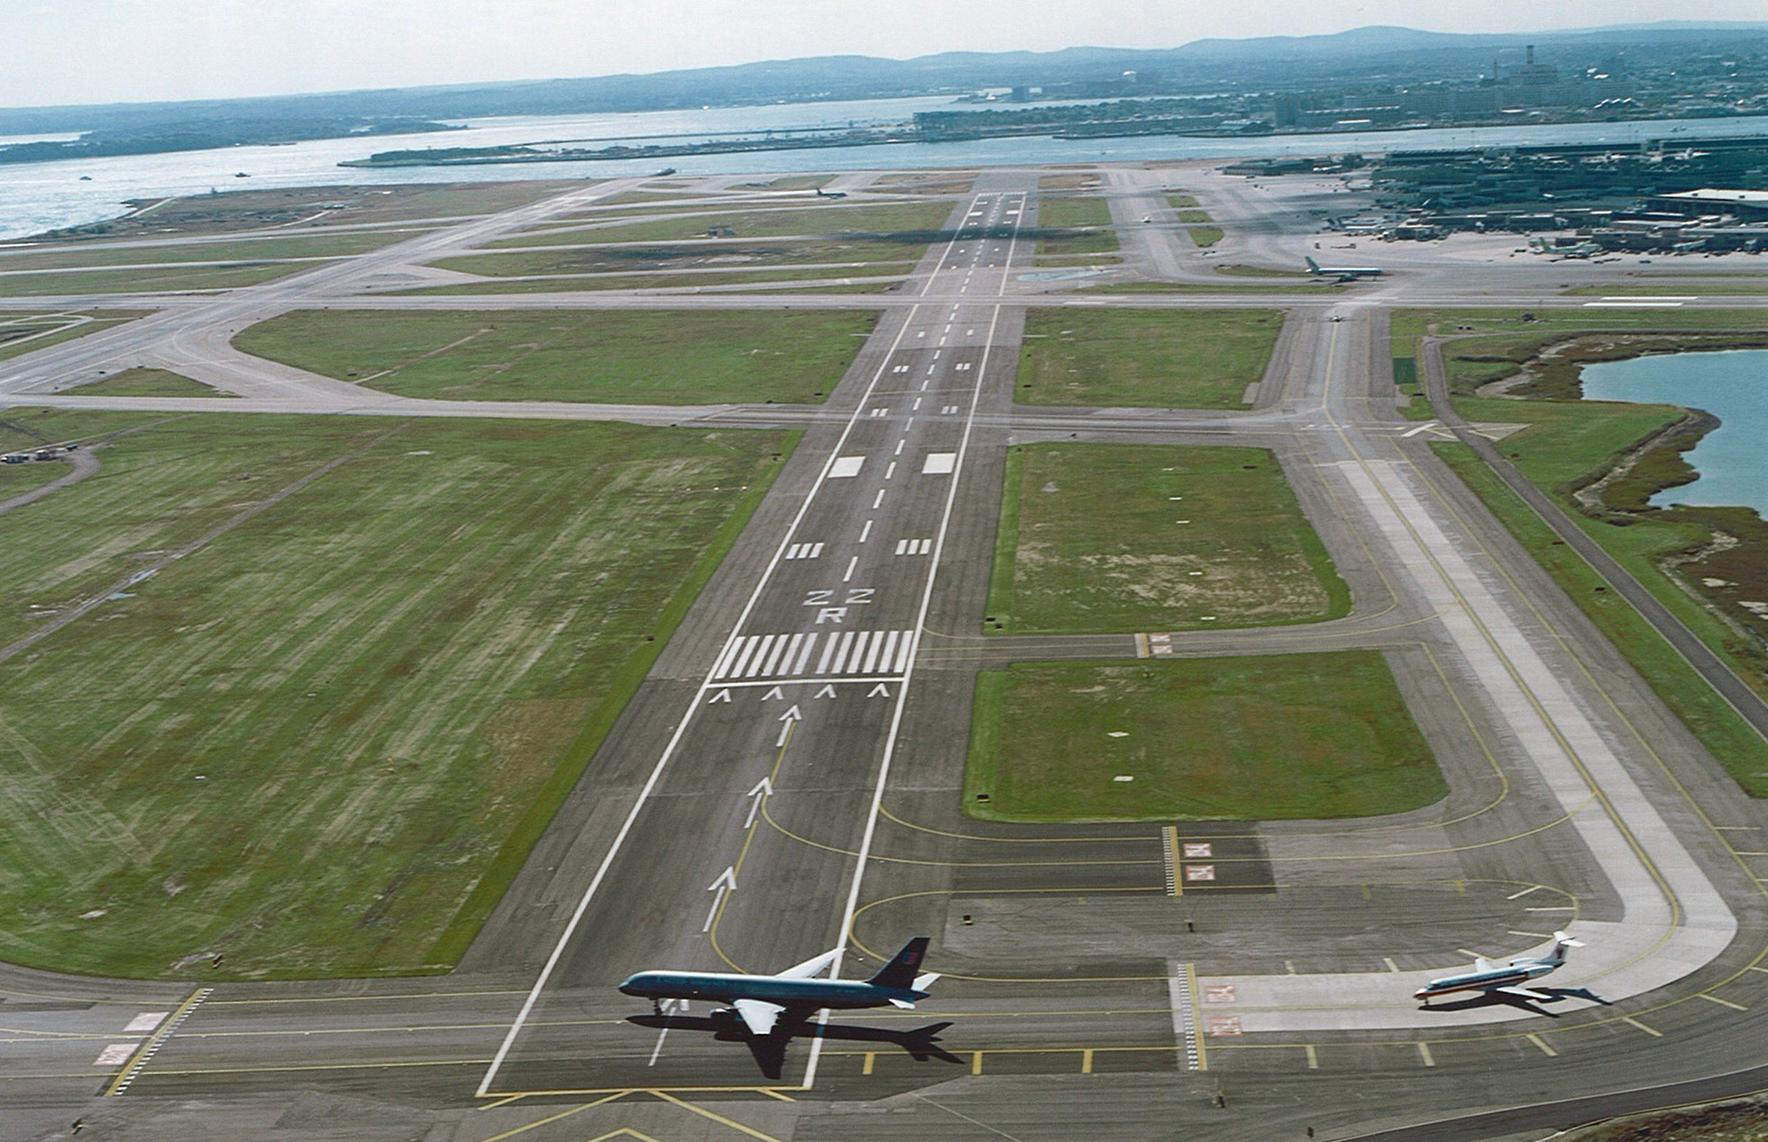 Airport runways: What do those big numbers mean?